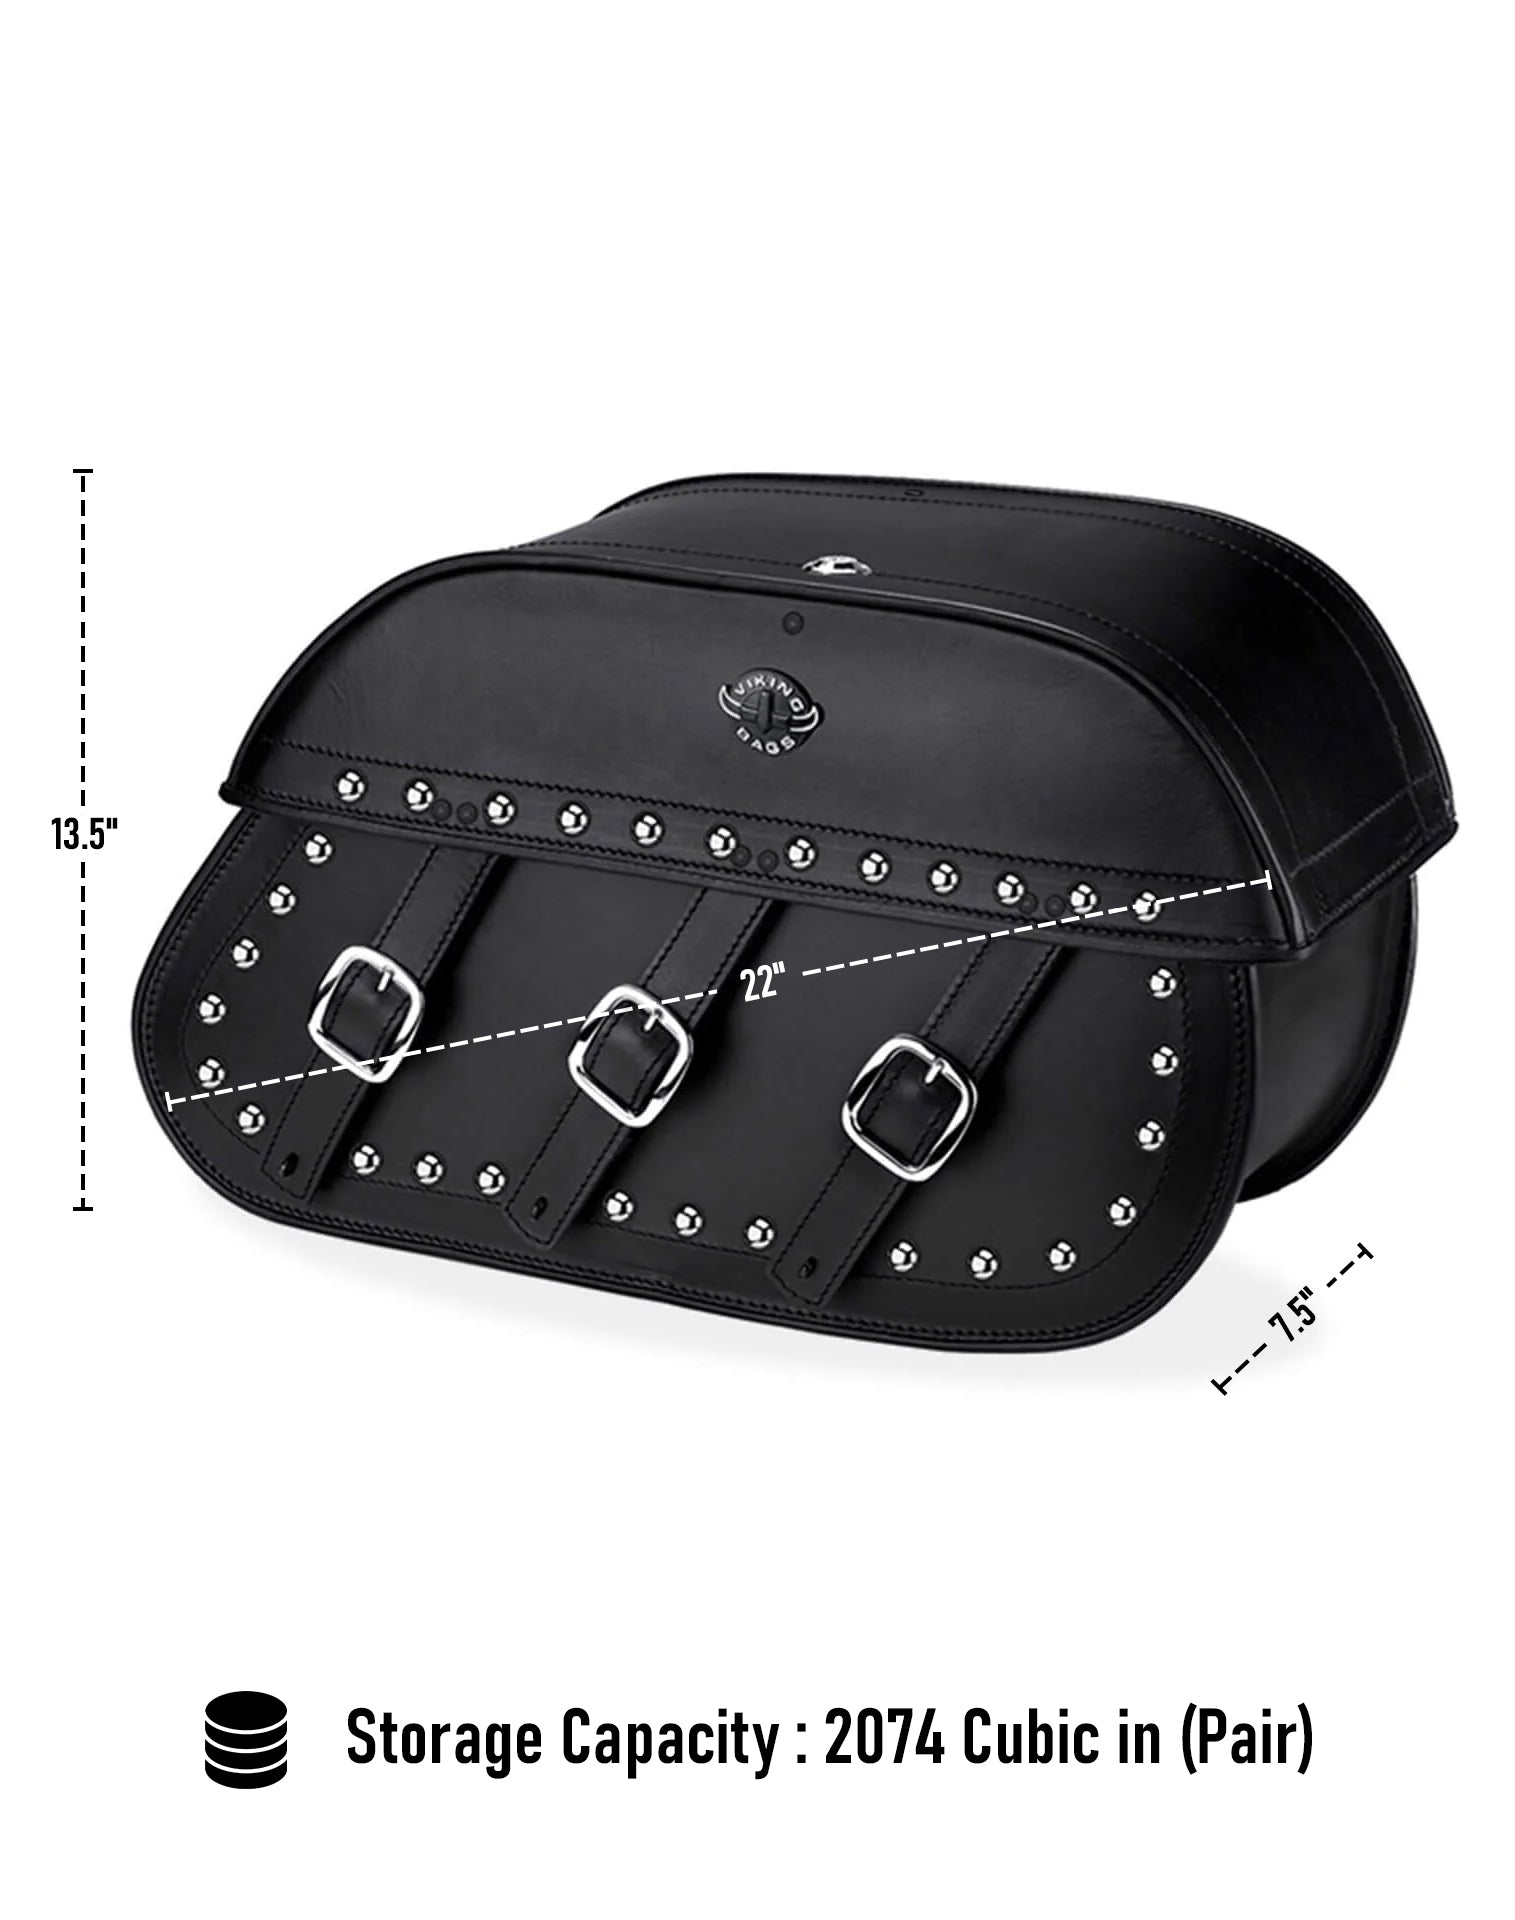 Viking Trianon Extra Large Studded Leather Motorcycle Saddlebags For Harley Softail Night Train Fxstb I Can Store Your Ridings Gears